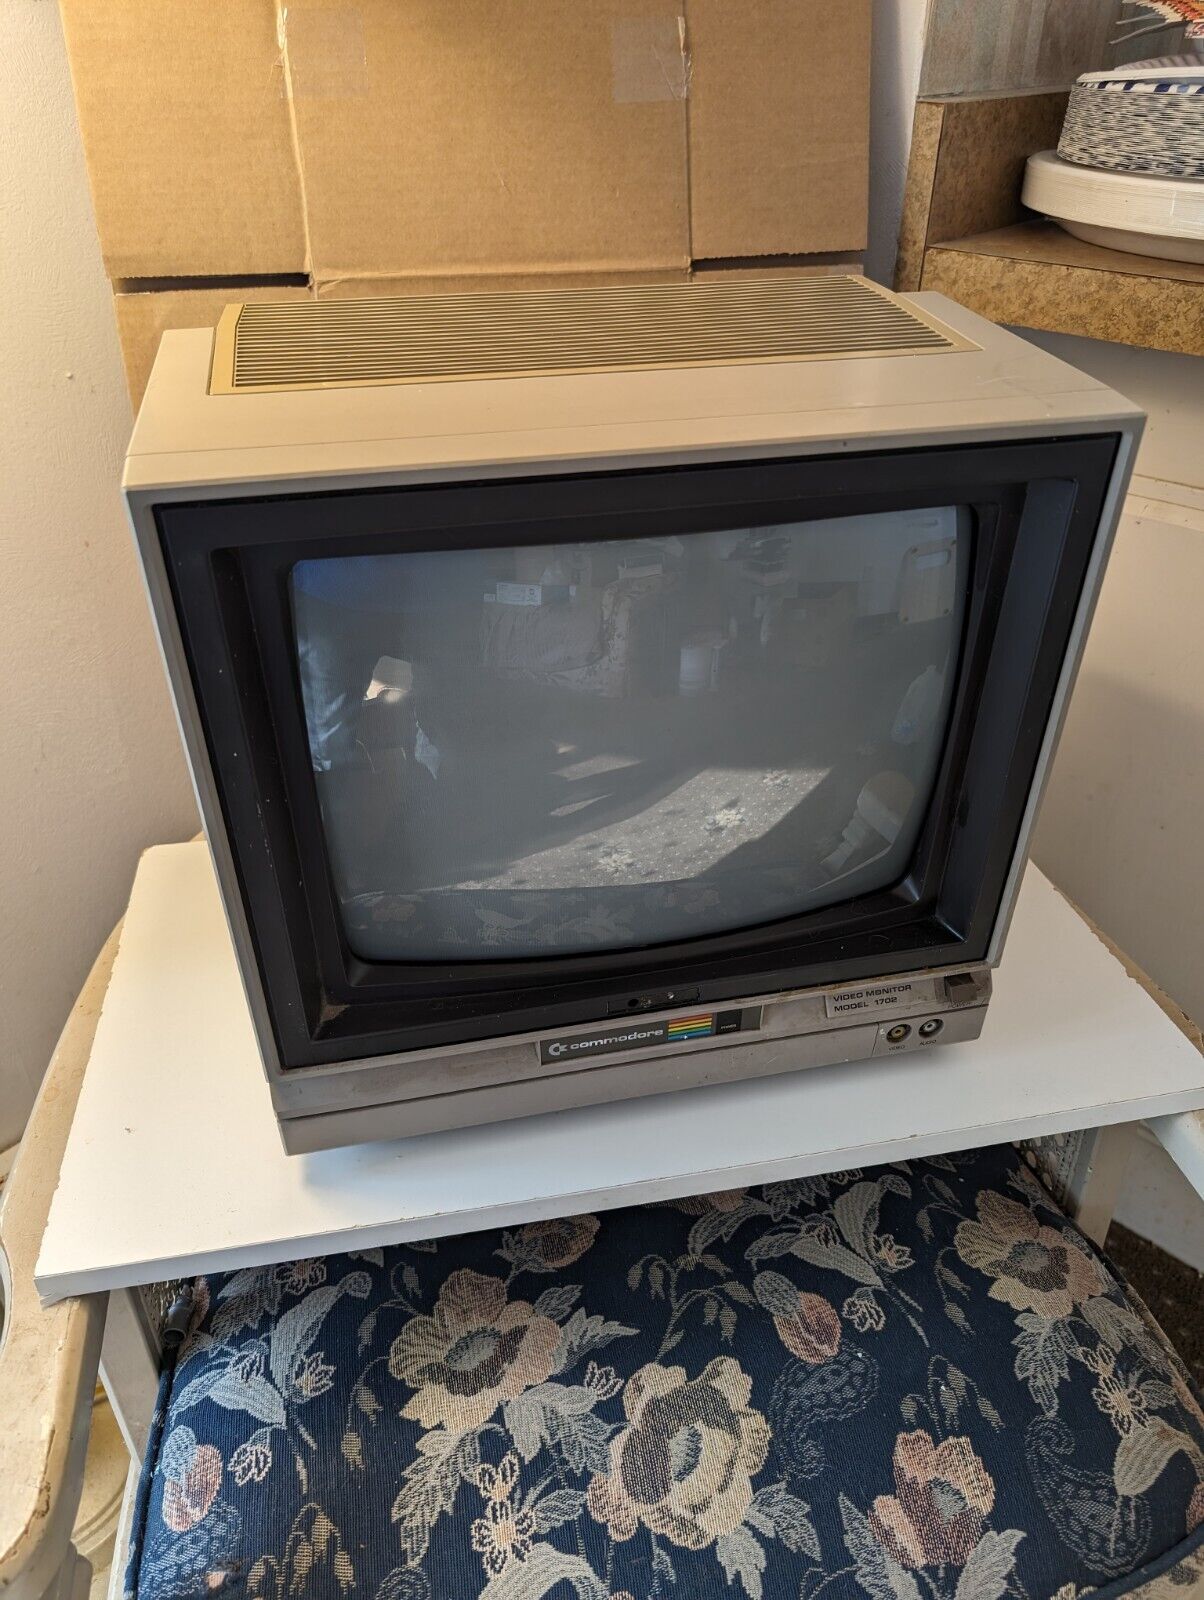 Commodore 1702 Computer Color Video Monitor CRT Tested&Fully Functional